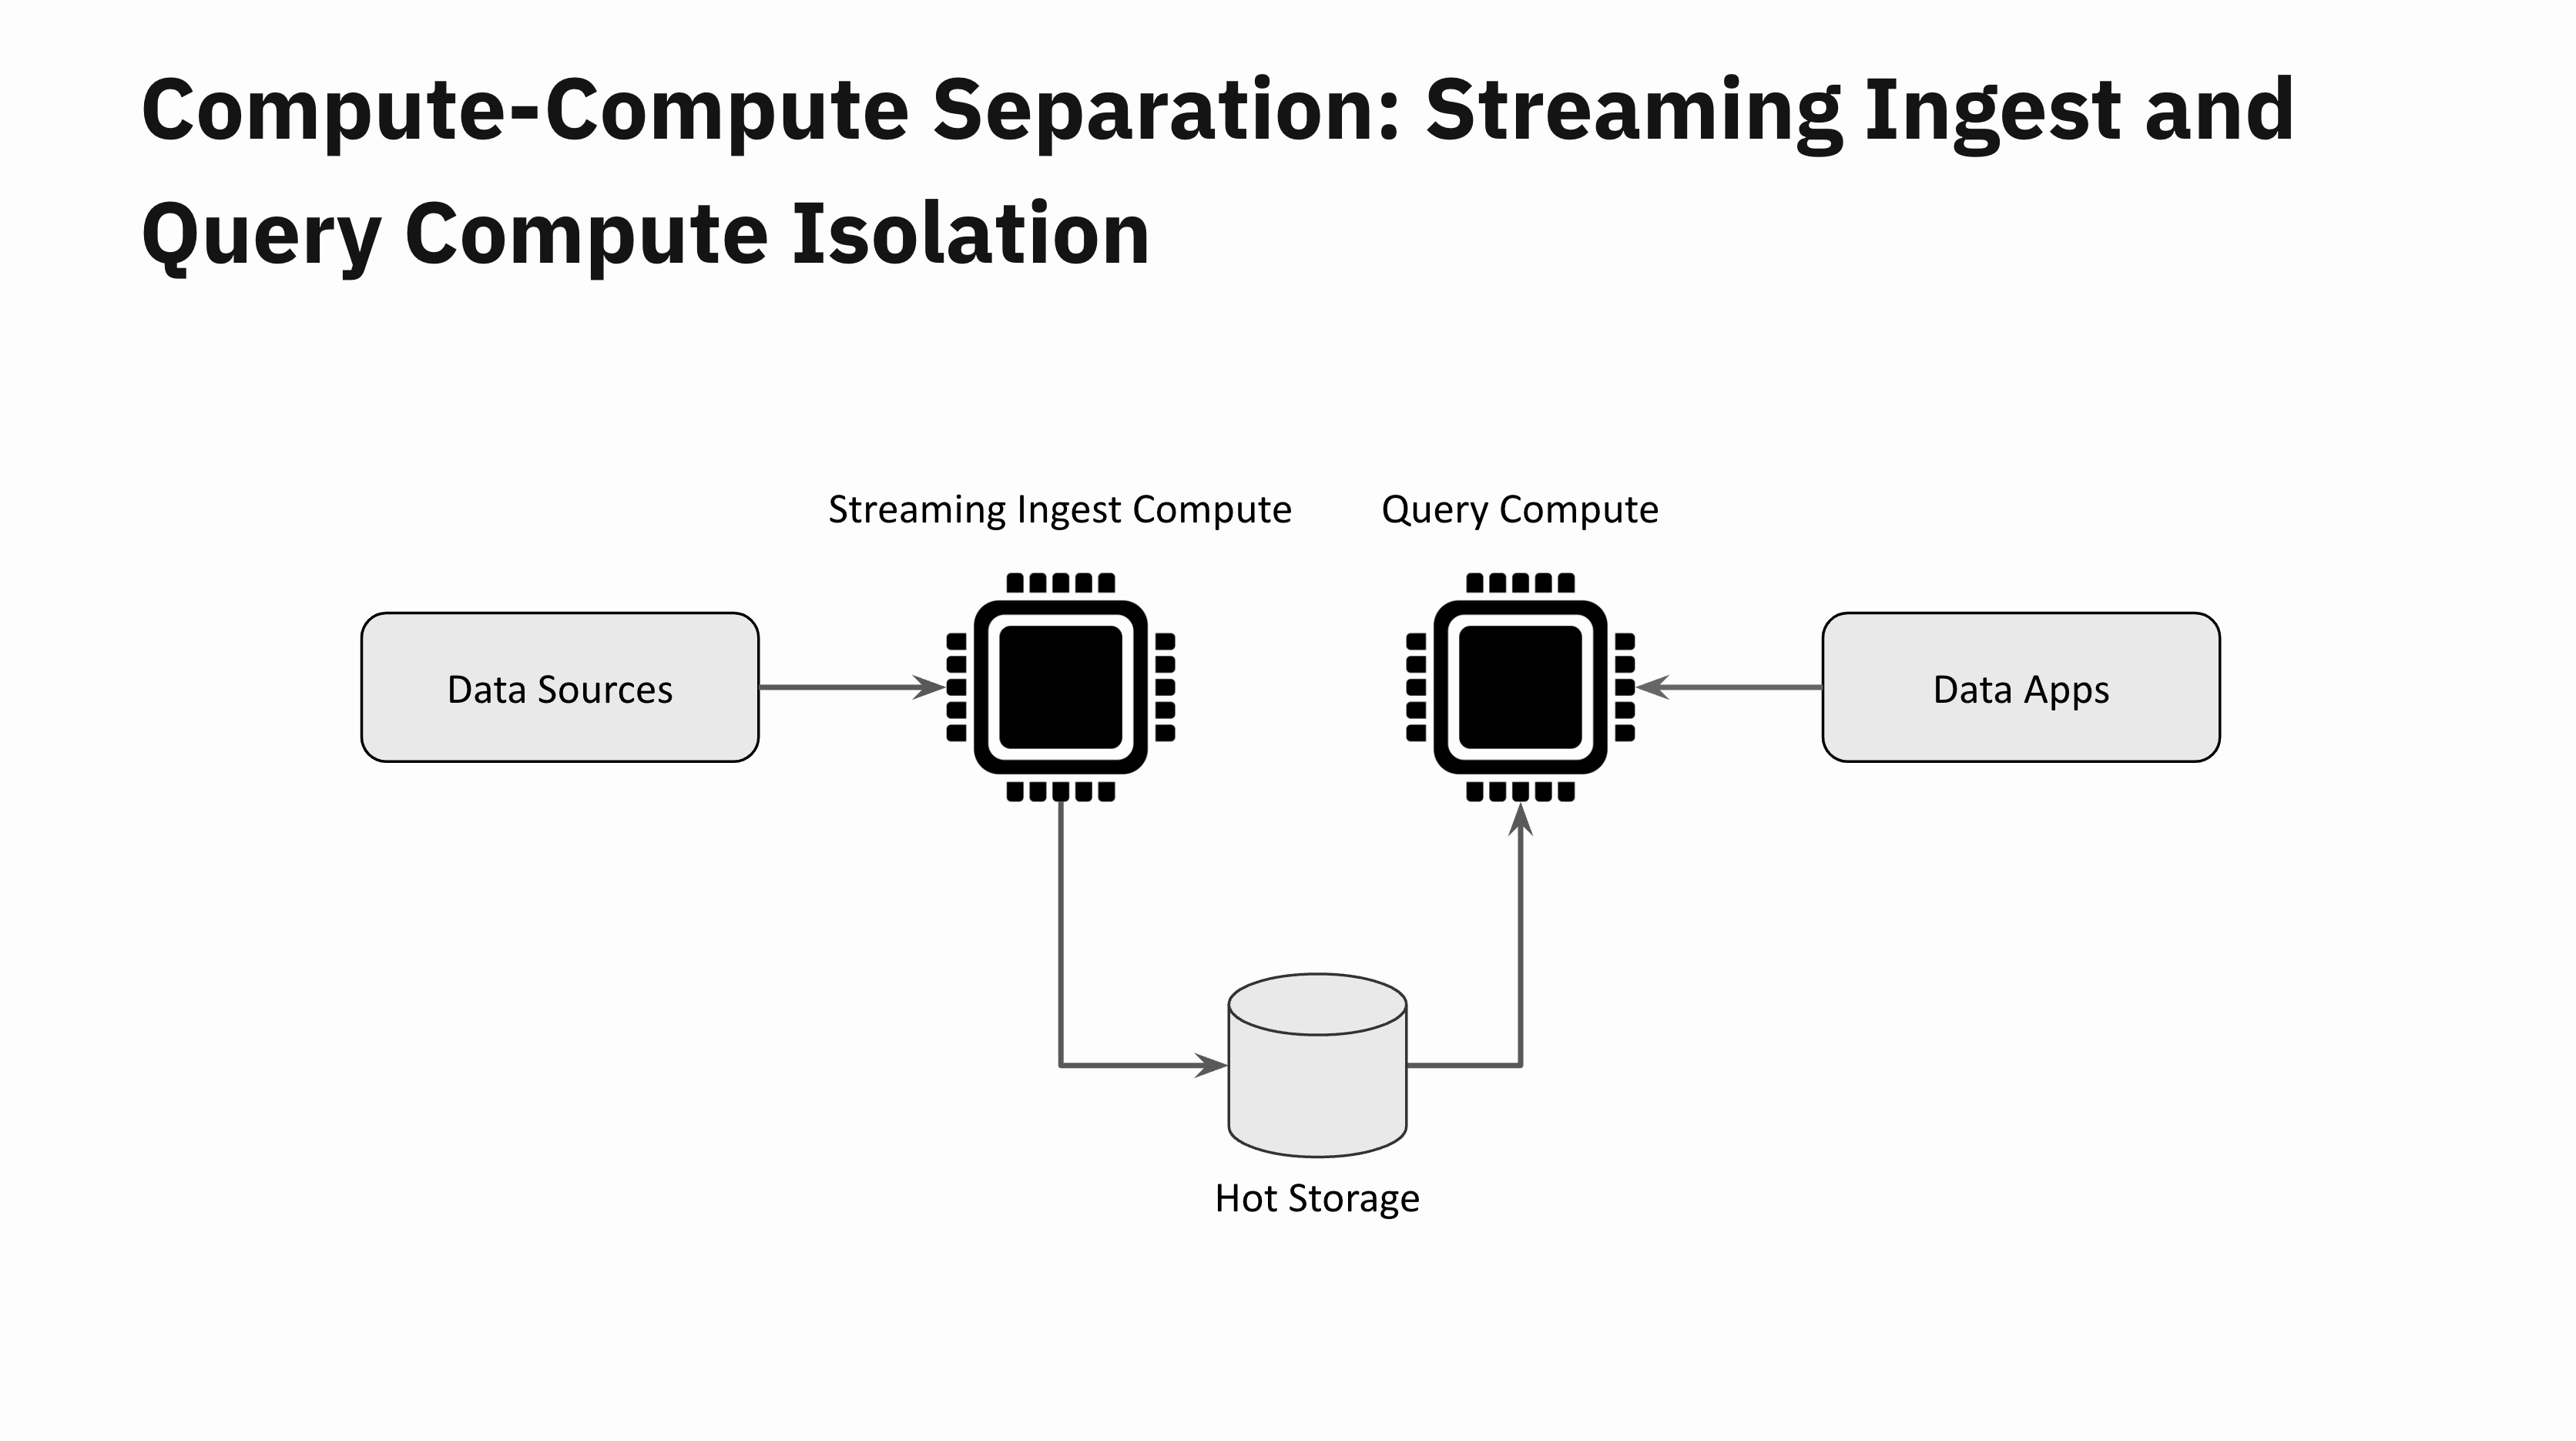 Streaming ingest and query compute isolation